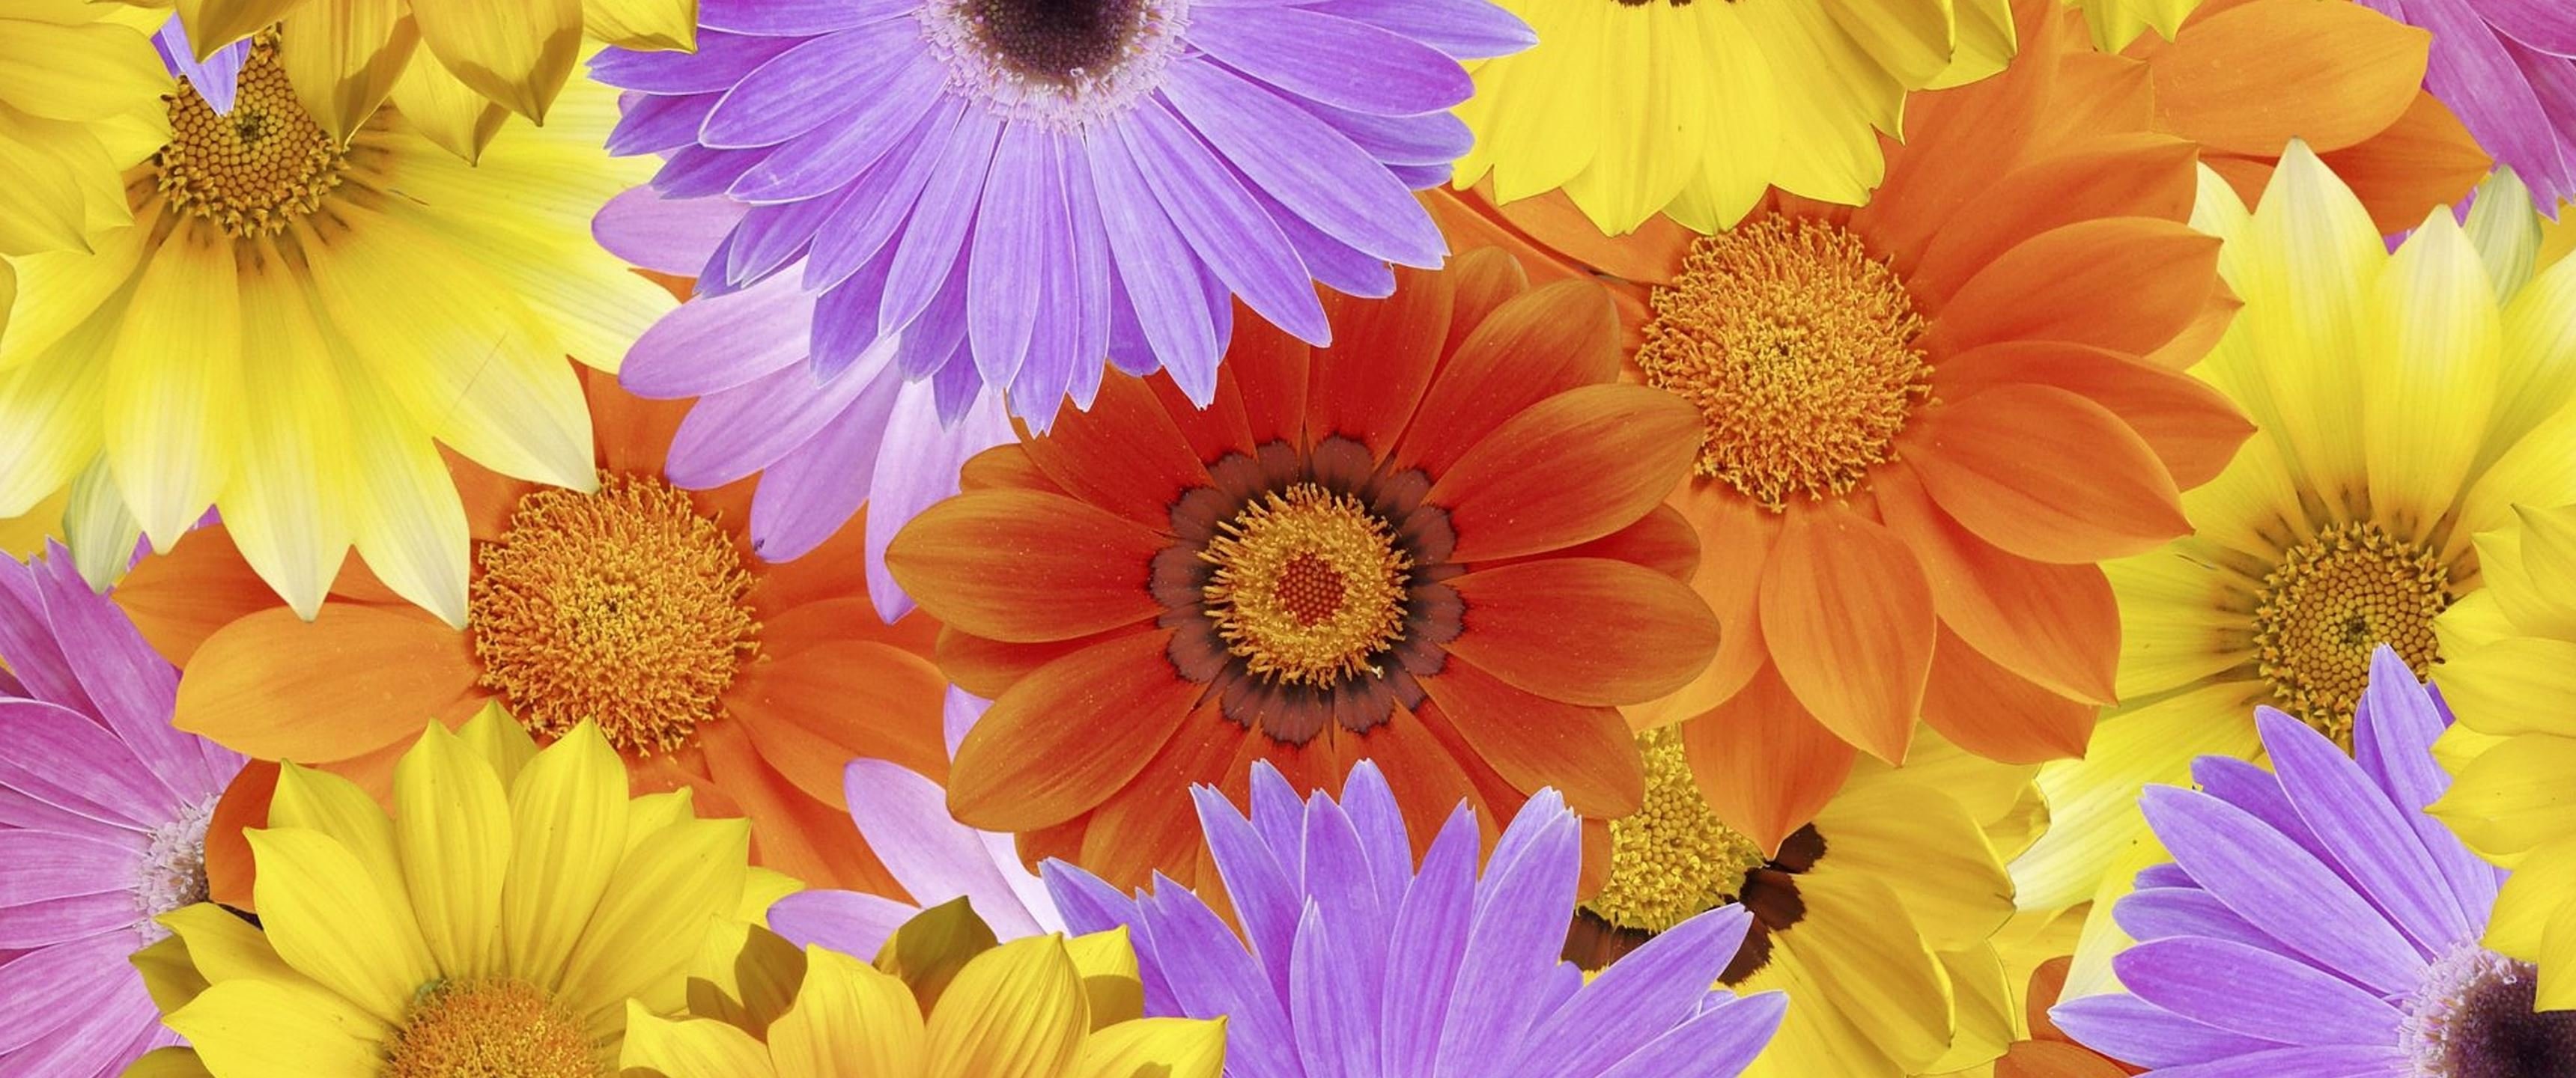 Free Daisy high quality wallpaper ID:363369 for hd 3440x1440 PC